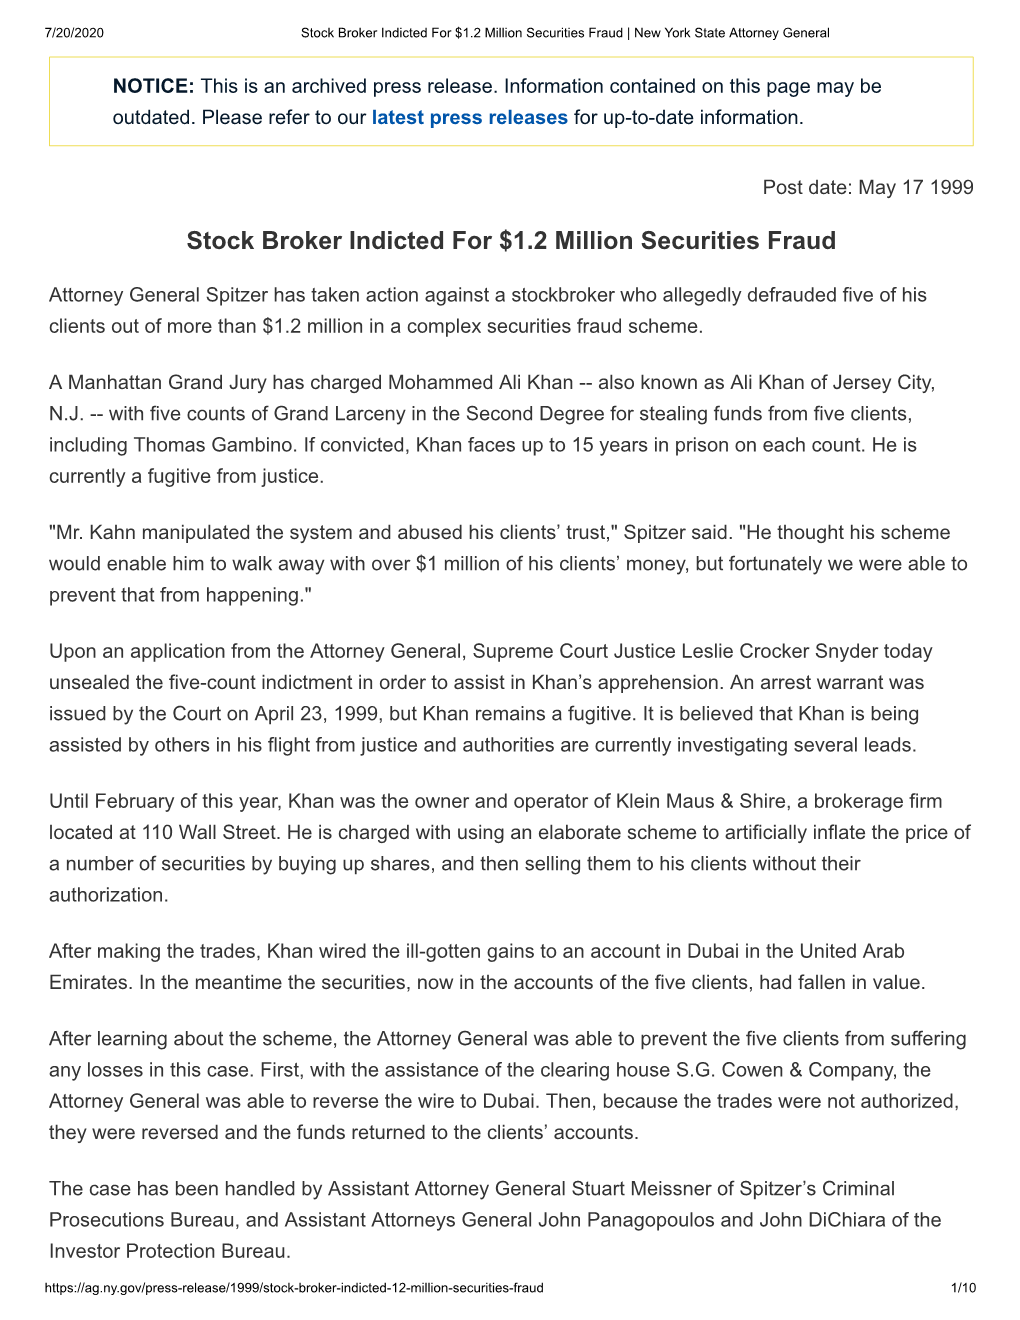 Stock Broker Indicted for $1.2 Million Securities Fraud | New York State Attorney General